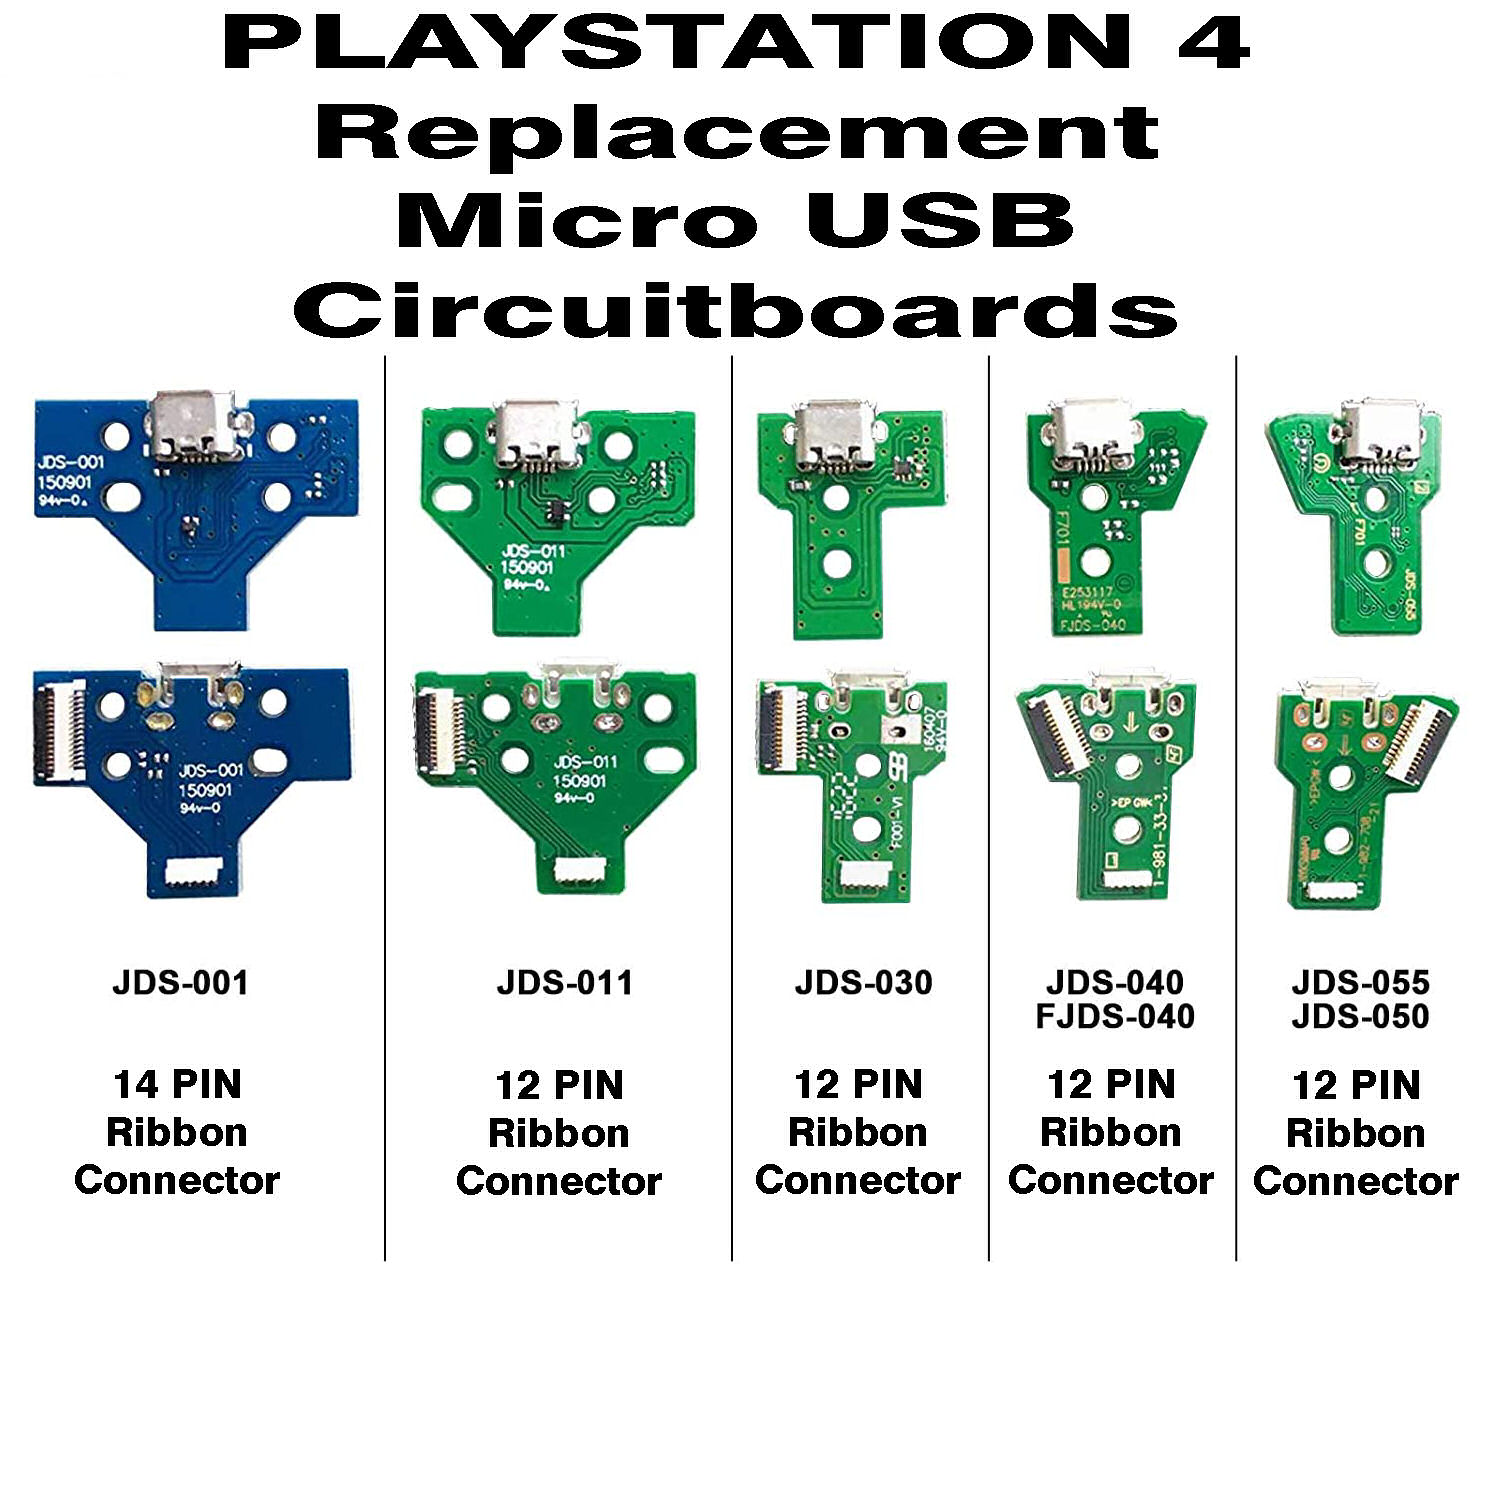 PlayStation 4 Replacement Micro USB Circuit Board - Helders Game Tech